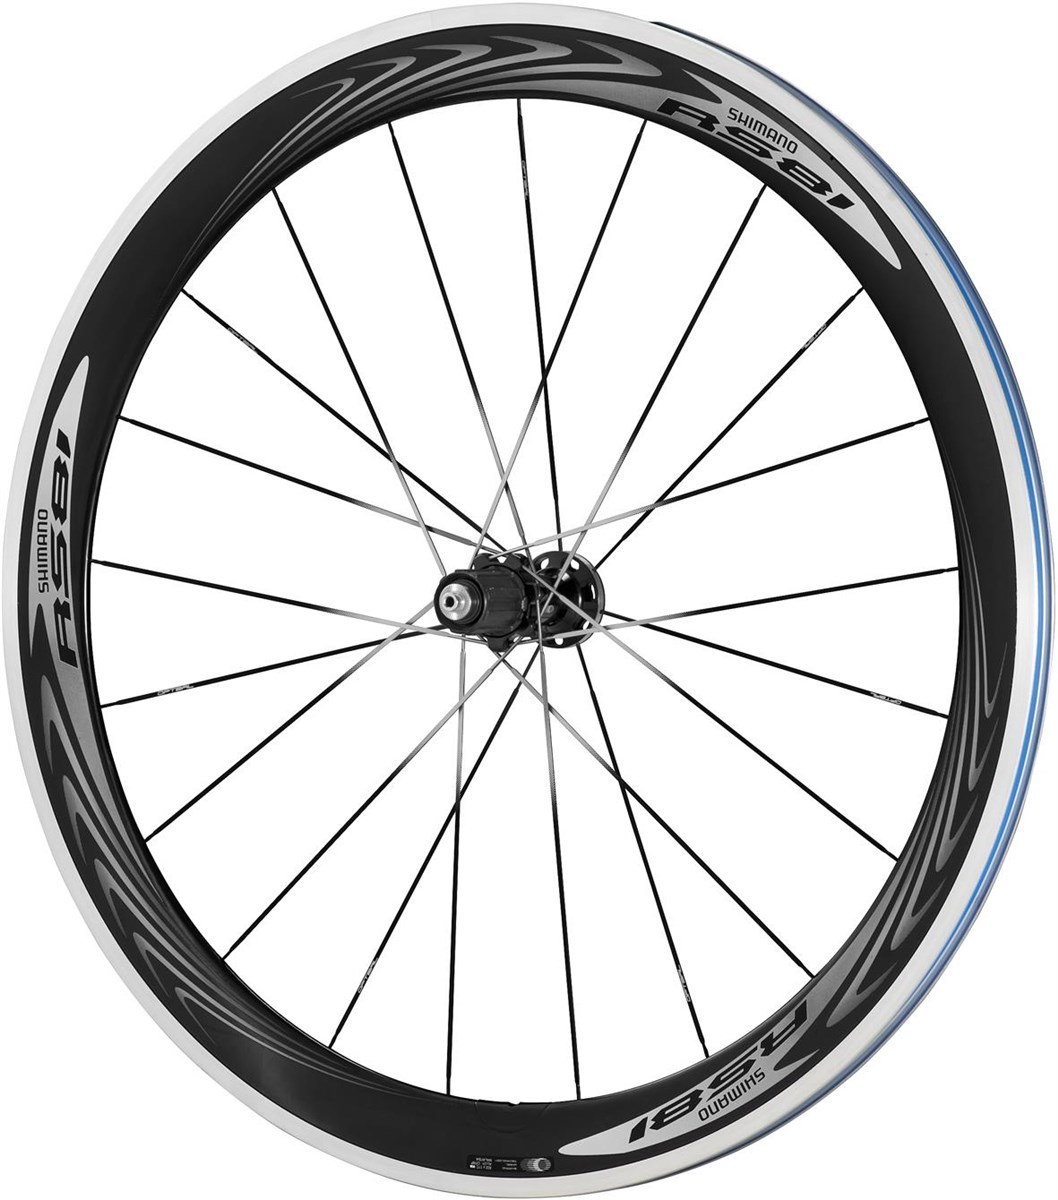 Shimano WH-RS81-C50-CL Wheel - Carbon Clincher - 50mm - Pair